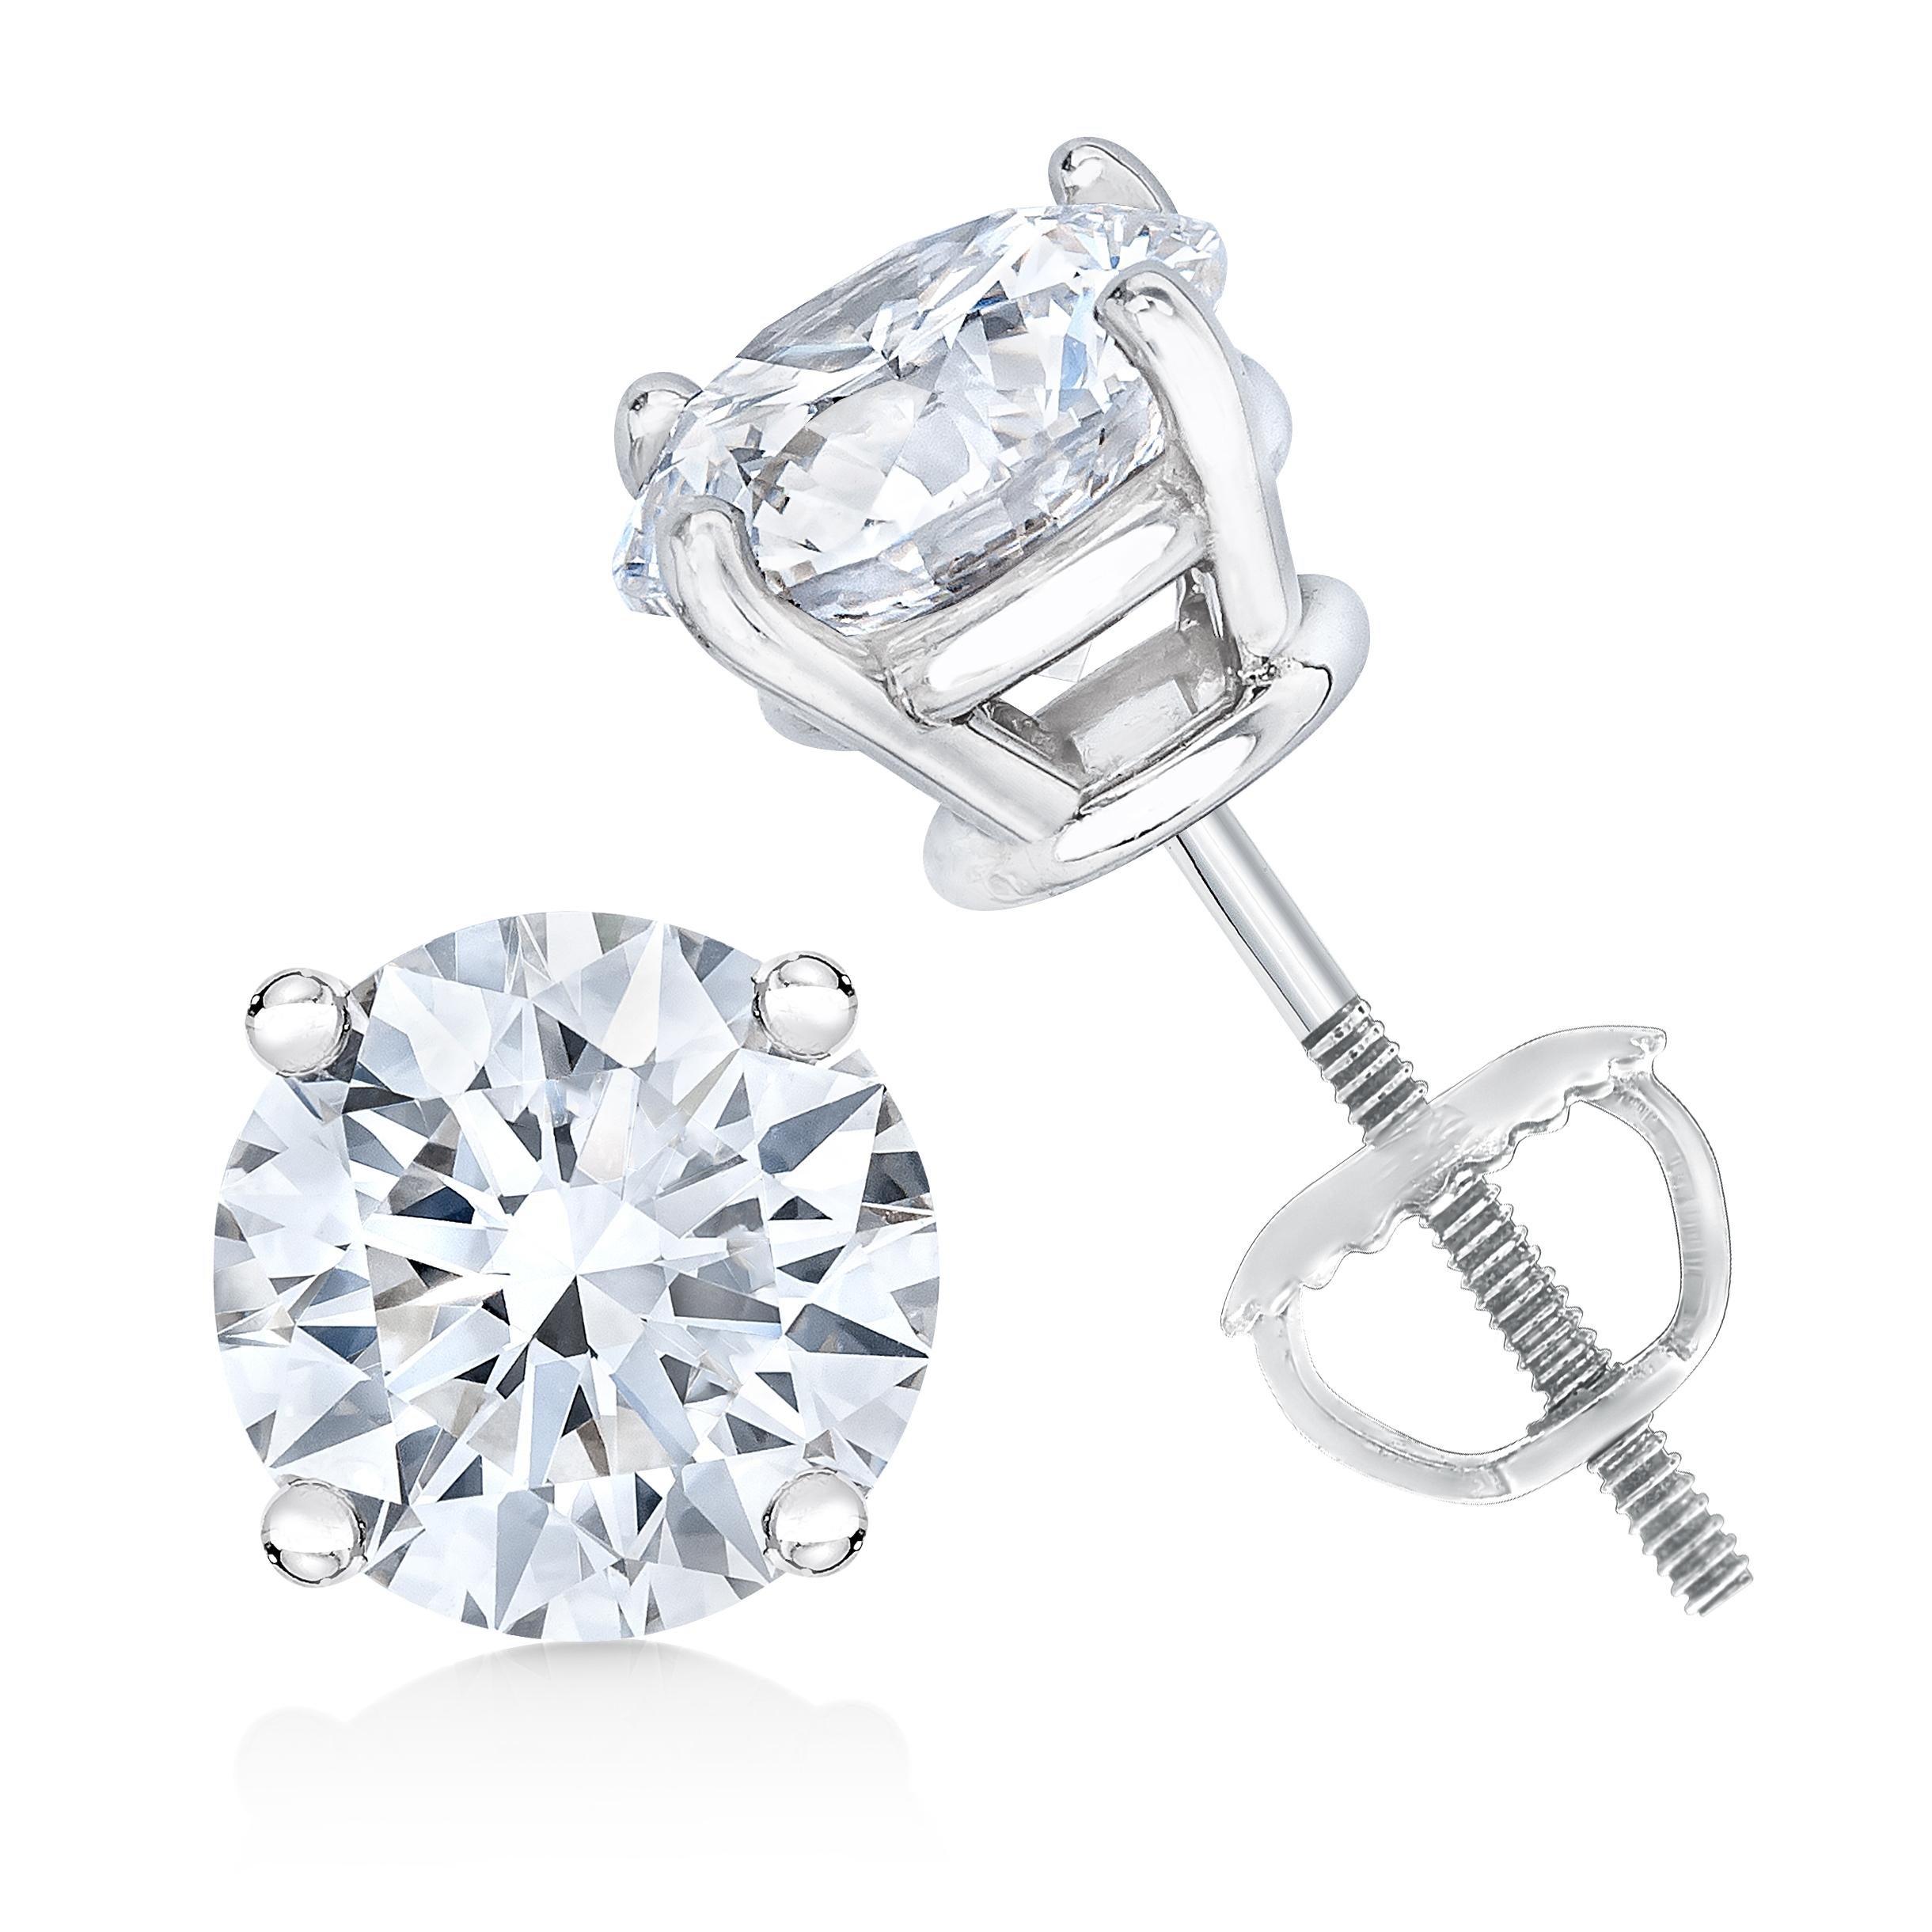 Two gorgeous white diamonds sit in a prong setting on these sparkling stud earrings. Crafted in 14k white gold, these diamond stud earrings feature a high polish finish. These stunning gold earrings feature 1 carats of diamonds, and the prong